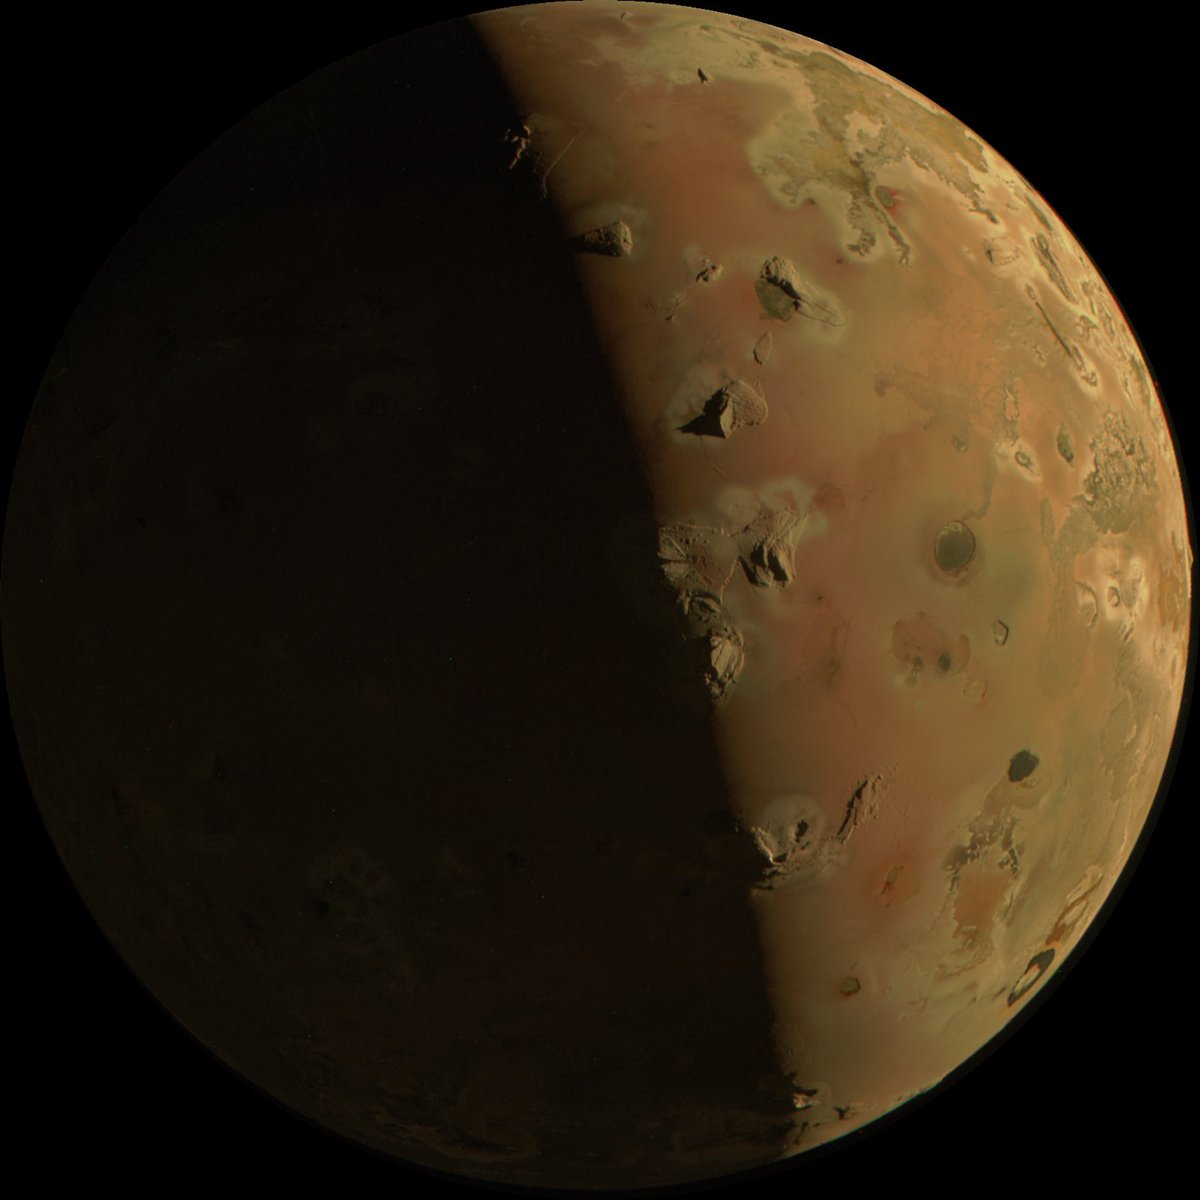 NEW PHOTO OF THE VOLCANIC MOON IO JUST DROPPED and it is *magnificent*